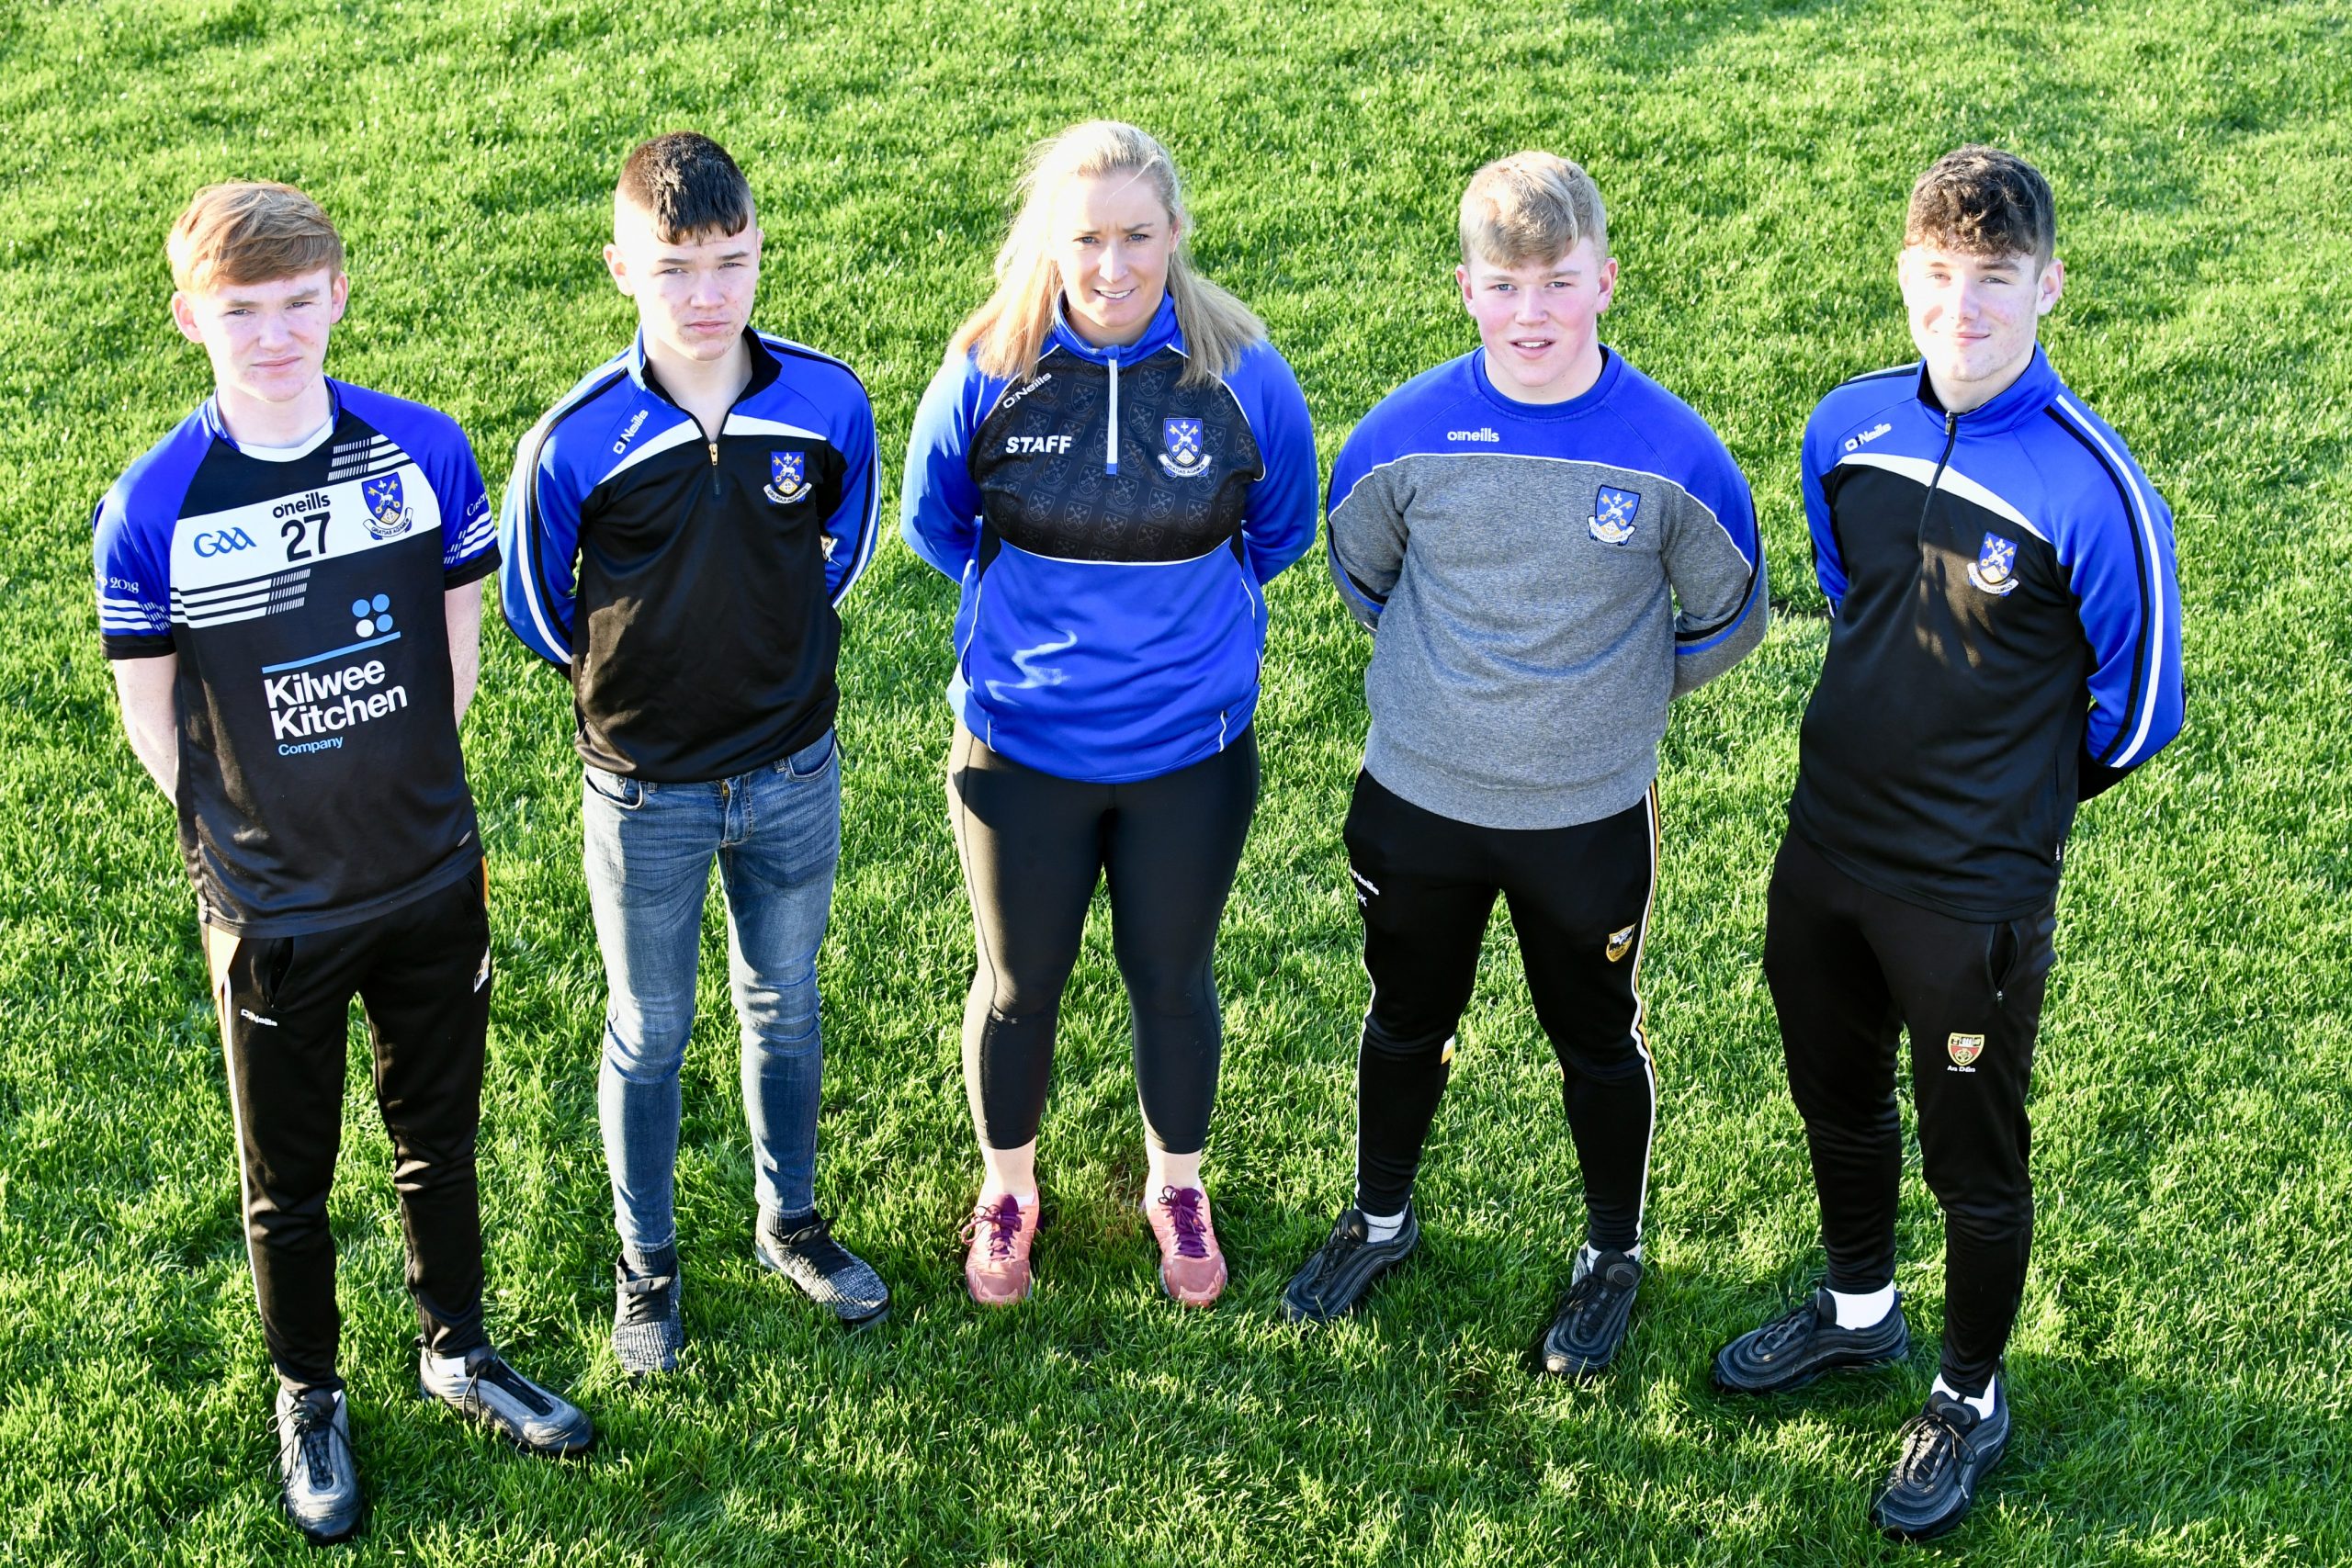 Ballycran players are enjoying College hurling with an eye to an All Ireland appointment